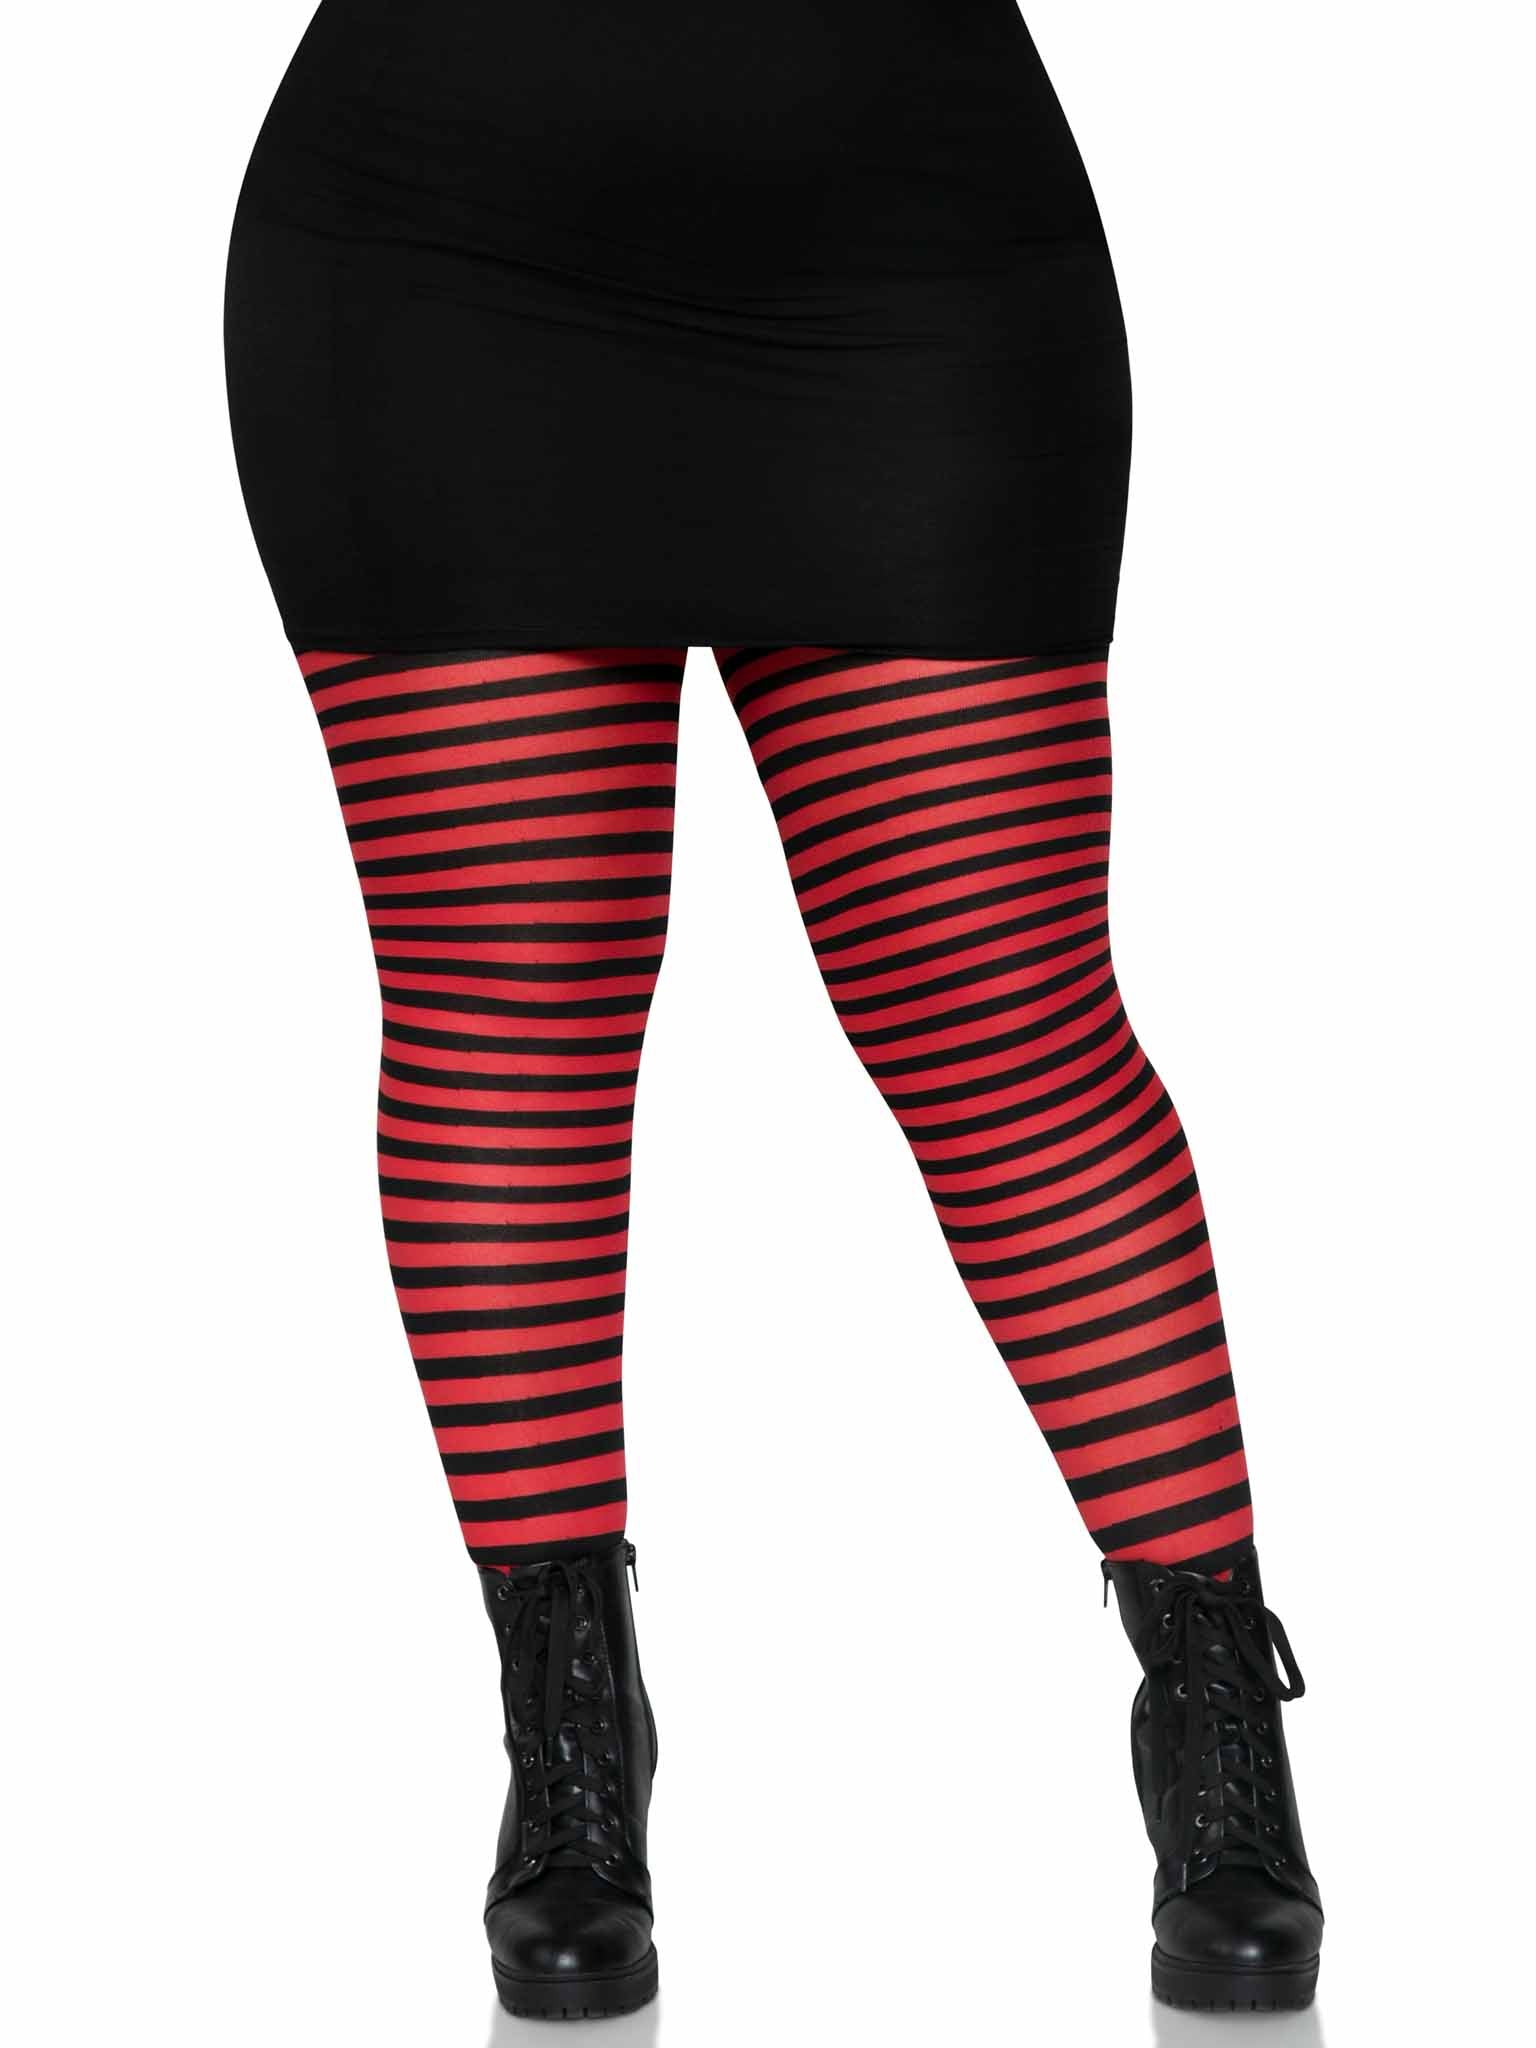 Tectonic Jeg har en engelskundervisning fugtighed Plus Size Striped Women's Tights, Sexy Hosiery | Leg Avenue